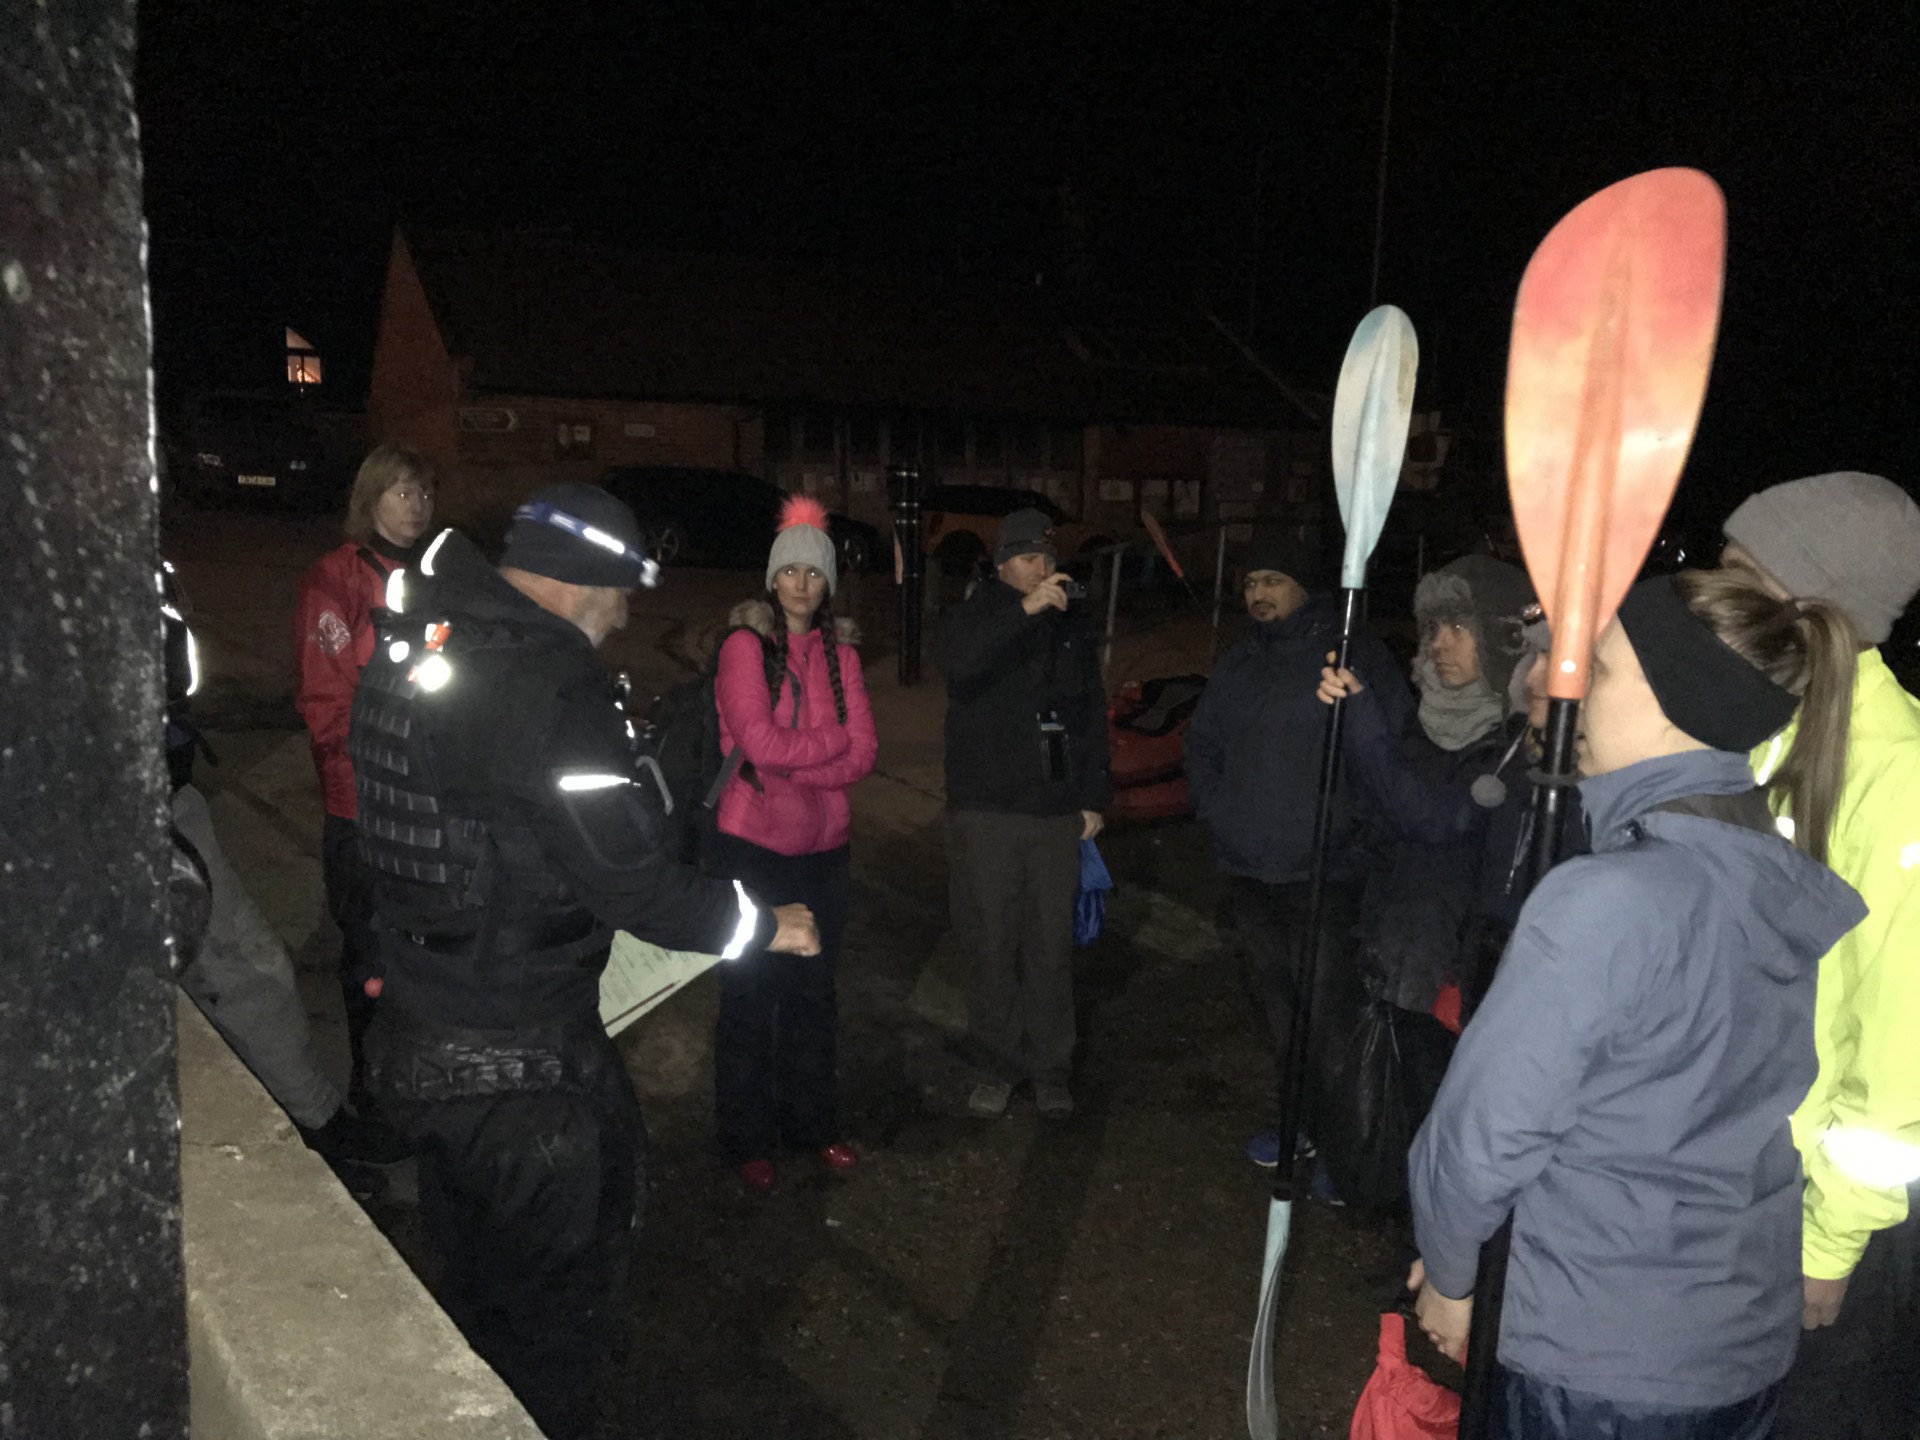 A guide doing the safety brief before a night kayak trip.